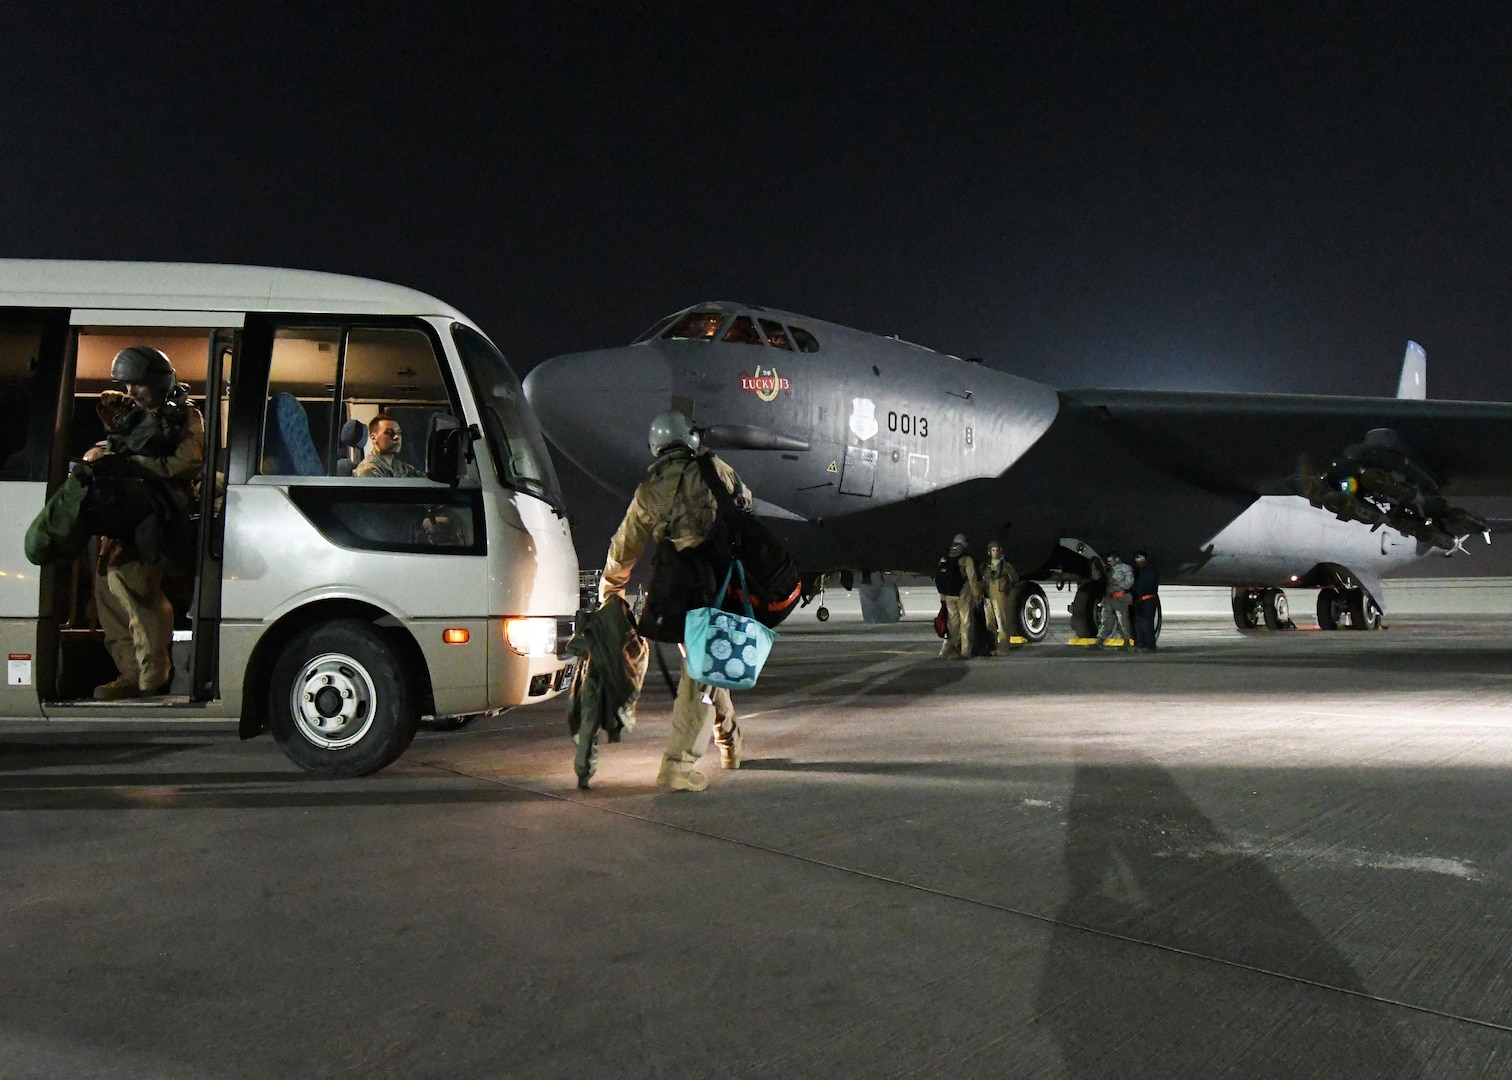 Aircrew members prepare to board a B-52 Stratofortress at an undisclosed location in Southwest Asia, Jan. 4, 2017. This flight was the 201st sortie without a maintenance cancelation for the 96th Expeditionary Bomb Squadron and 96th Expeditionary Aircraft Maintenance Unit, marking a new B-52 sortie streak record in support of Operation Inherent Resolve. (U.S. Air Force photo by Senior Airman Miles Wilson)